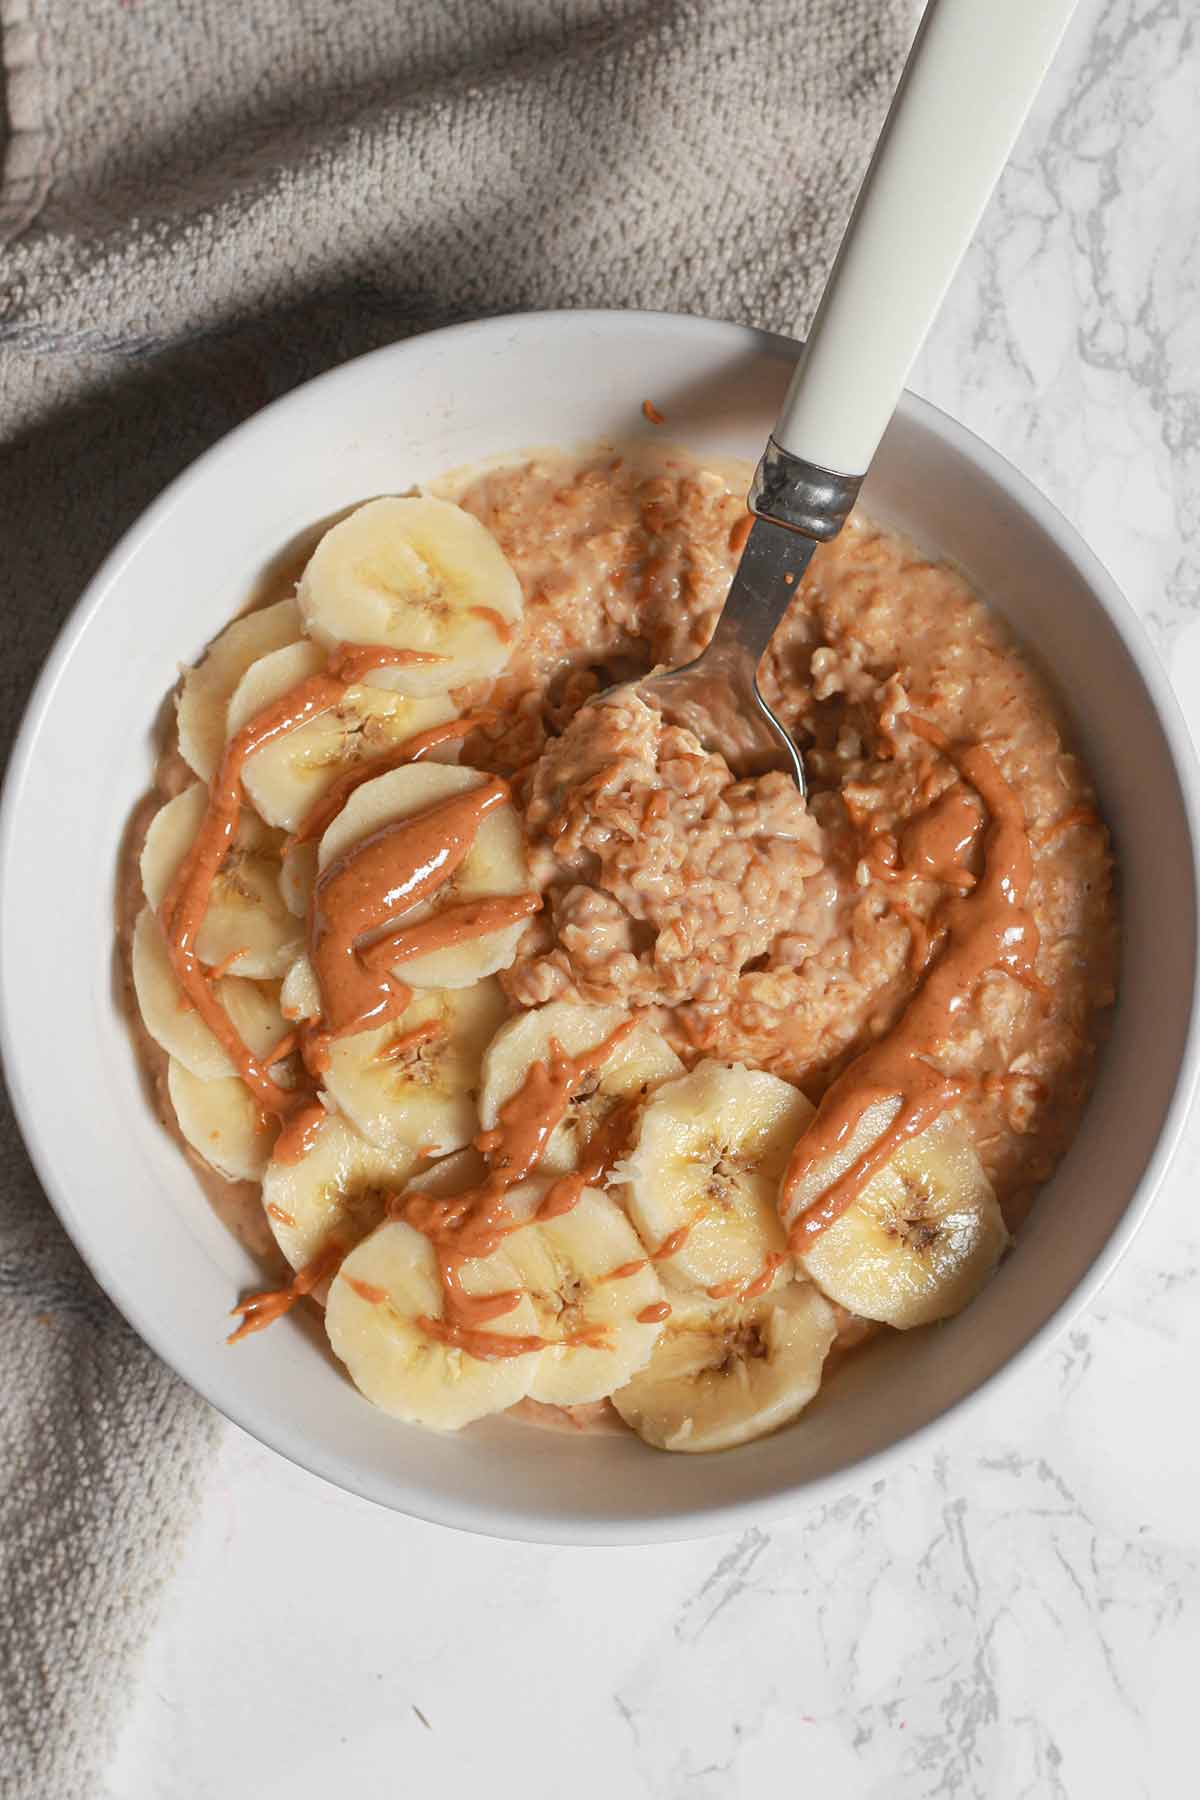 Peanut Butter Porridge In A Bowl With Banana Slices On Top